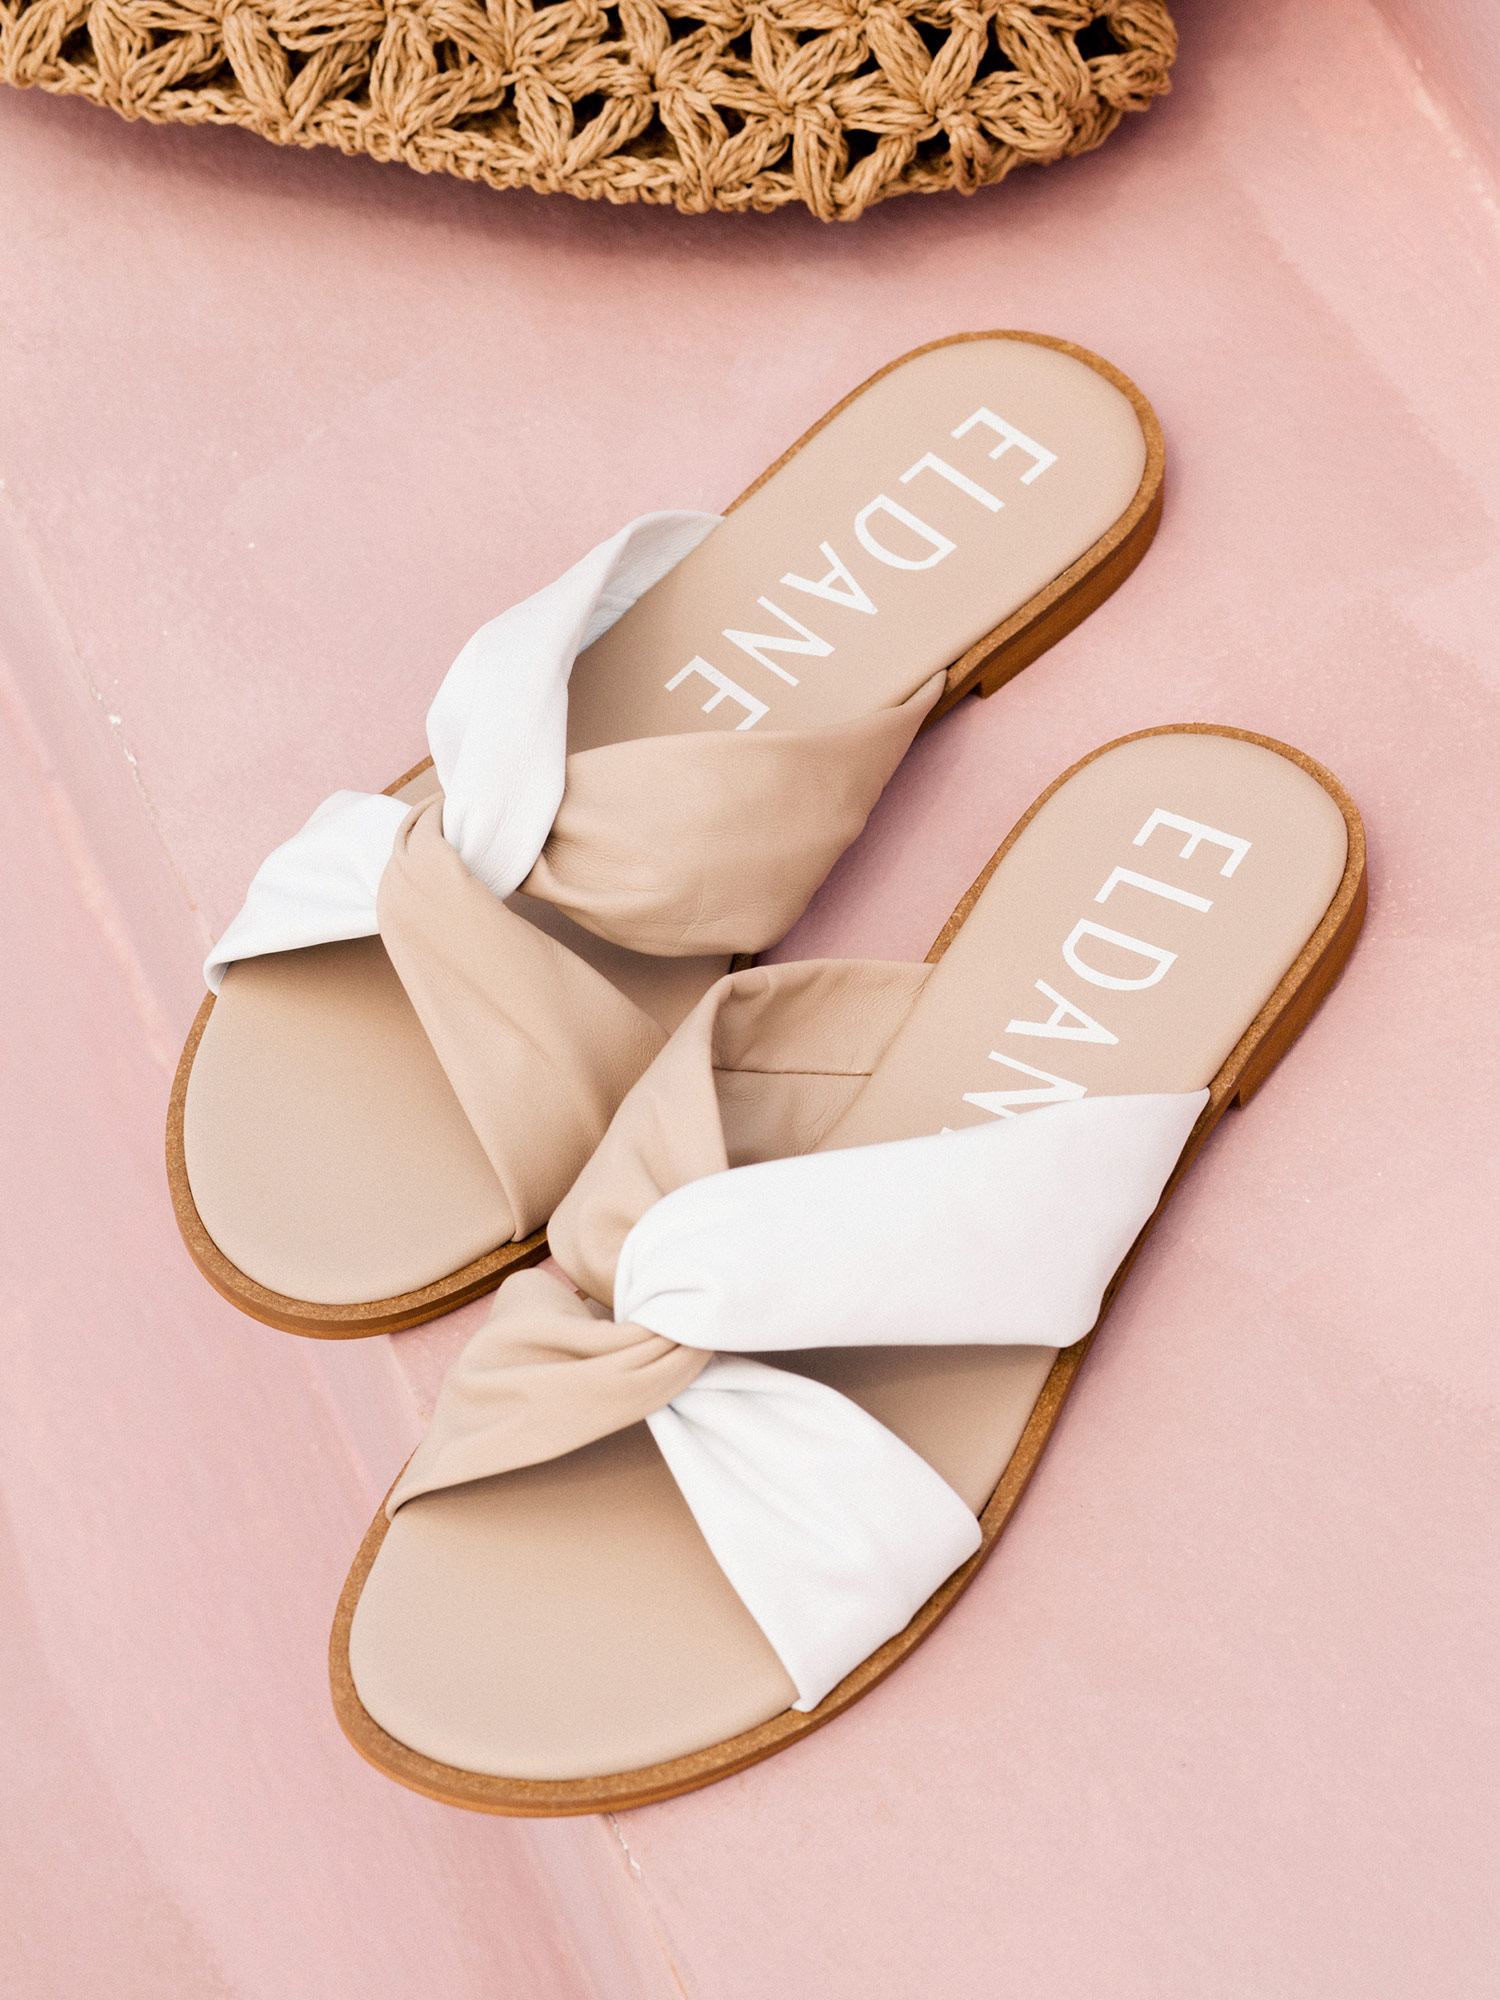 Flat leather sandals in sand and white